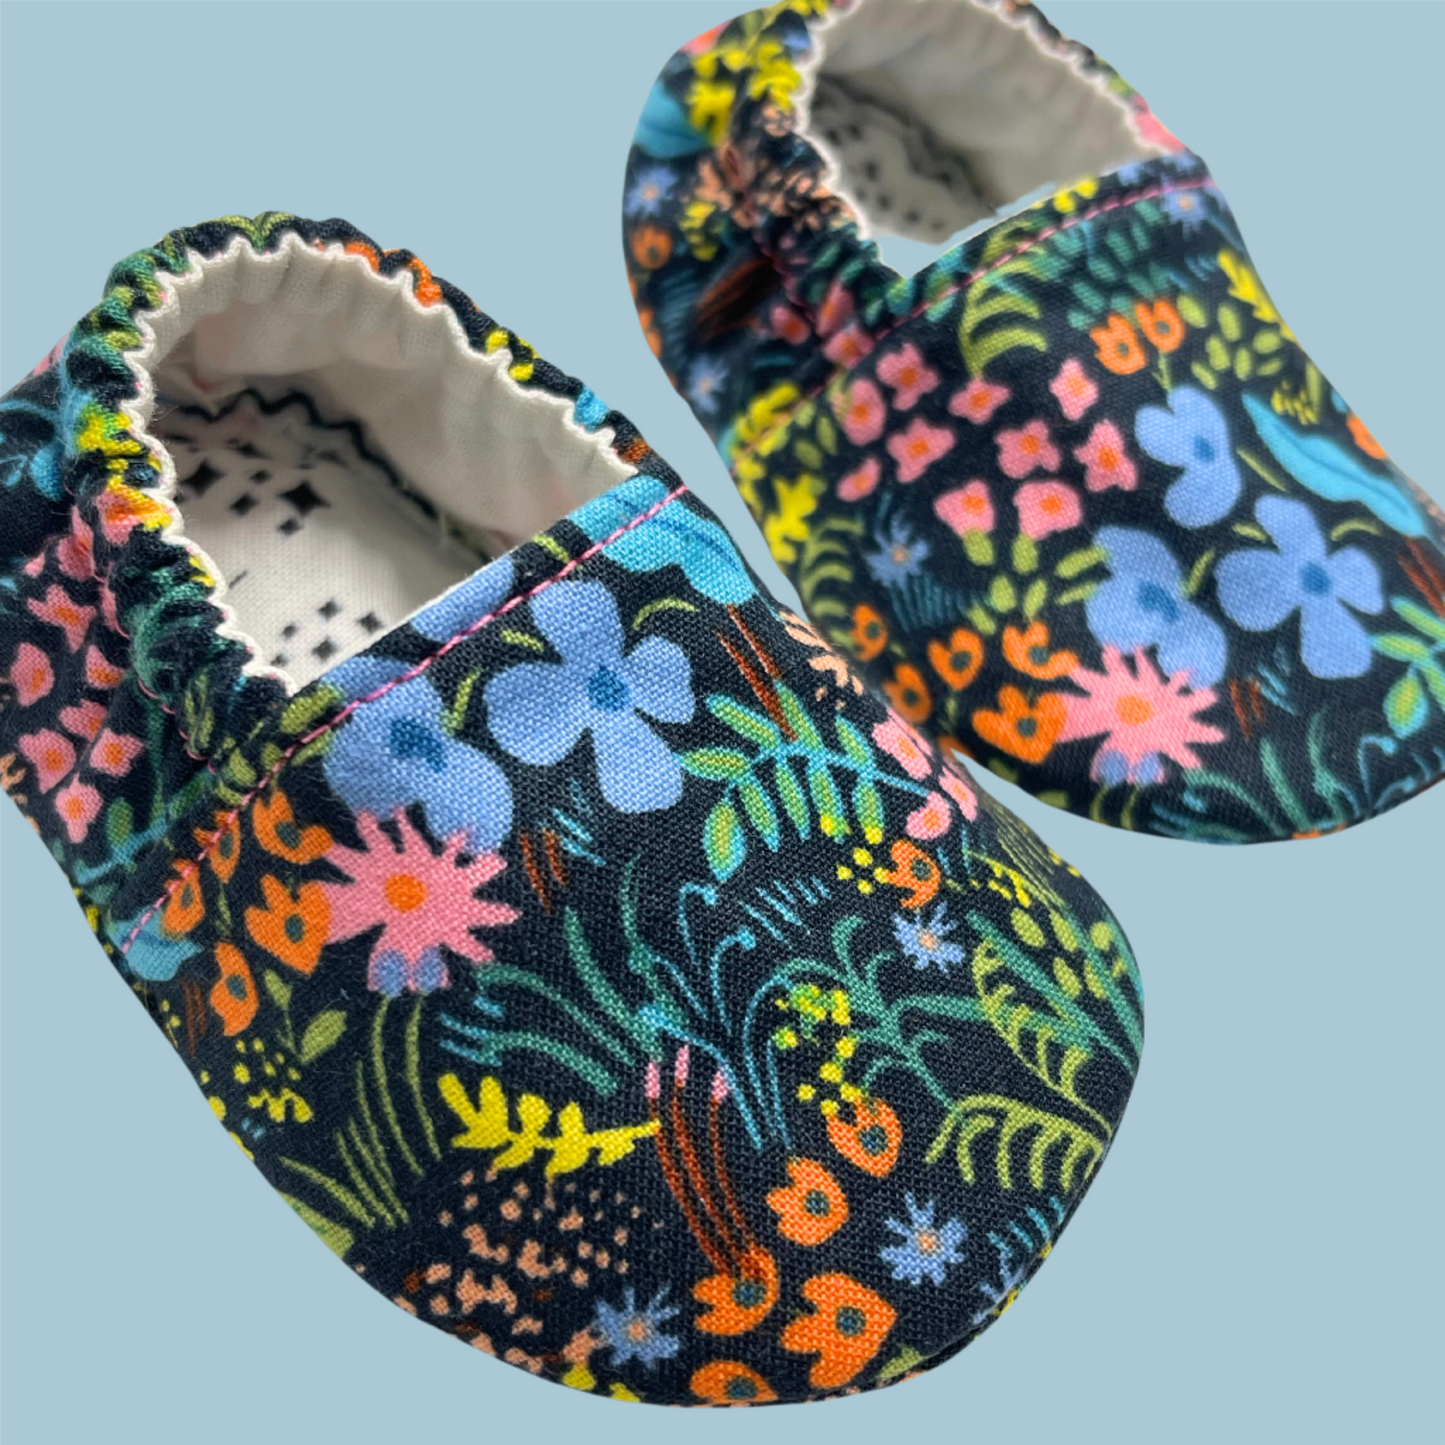 Neon Meadow Soft Sole Baby Shoes – Ready to Ship, Handmade in Kansas City